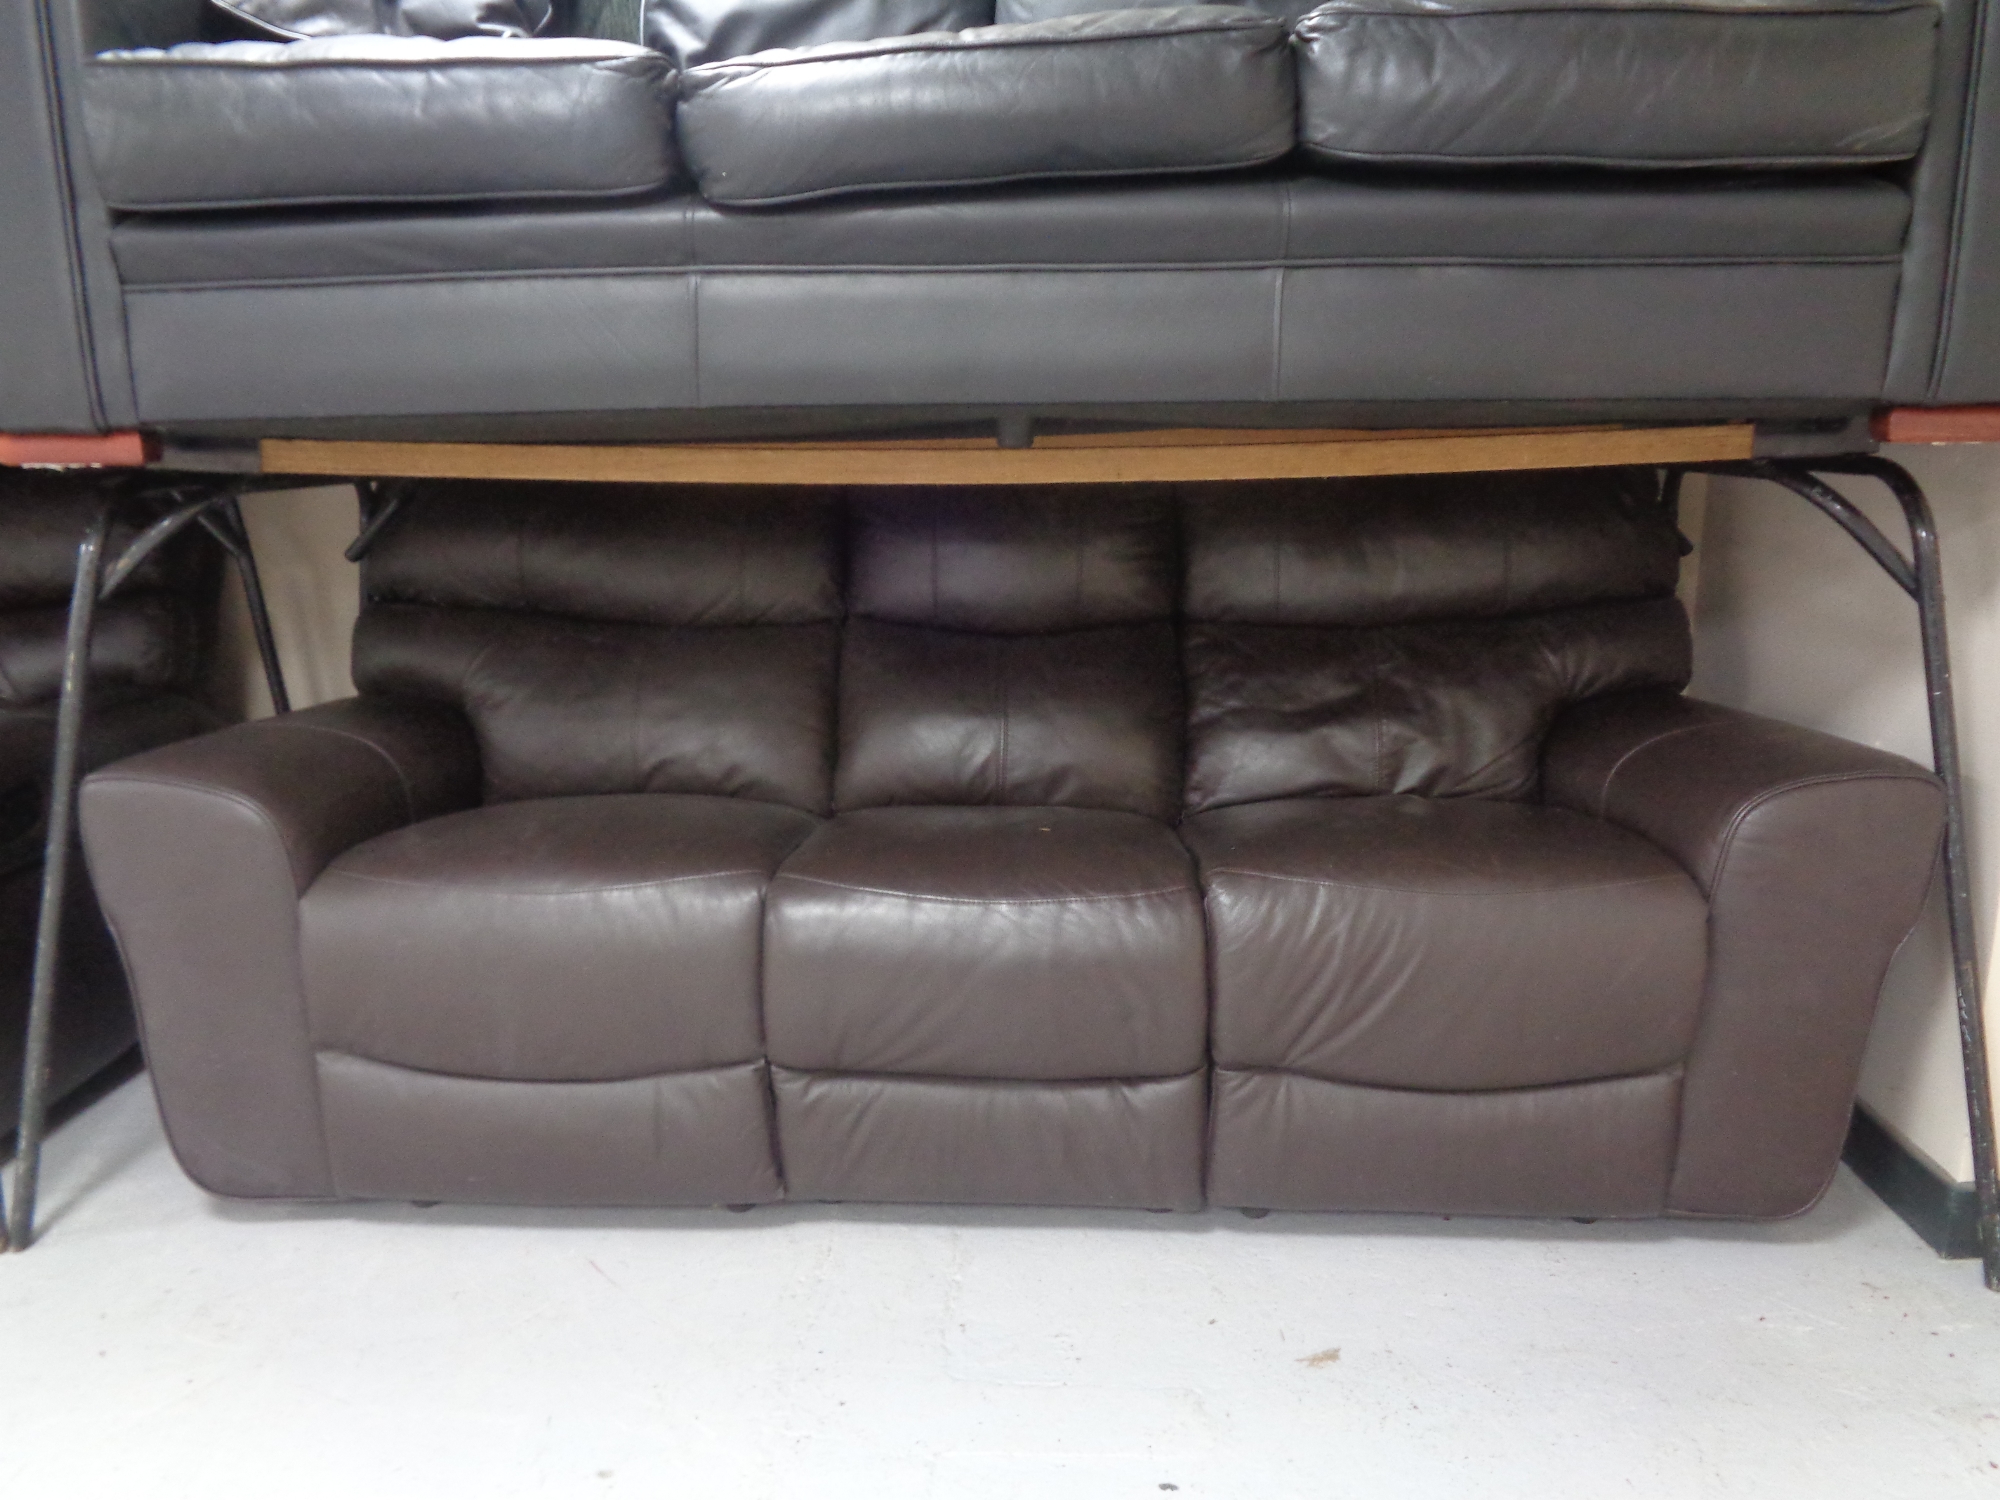 A brown leather manual reclining three seater settee with matching two seater settee.